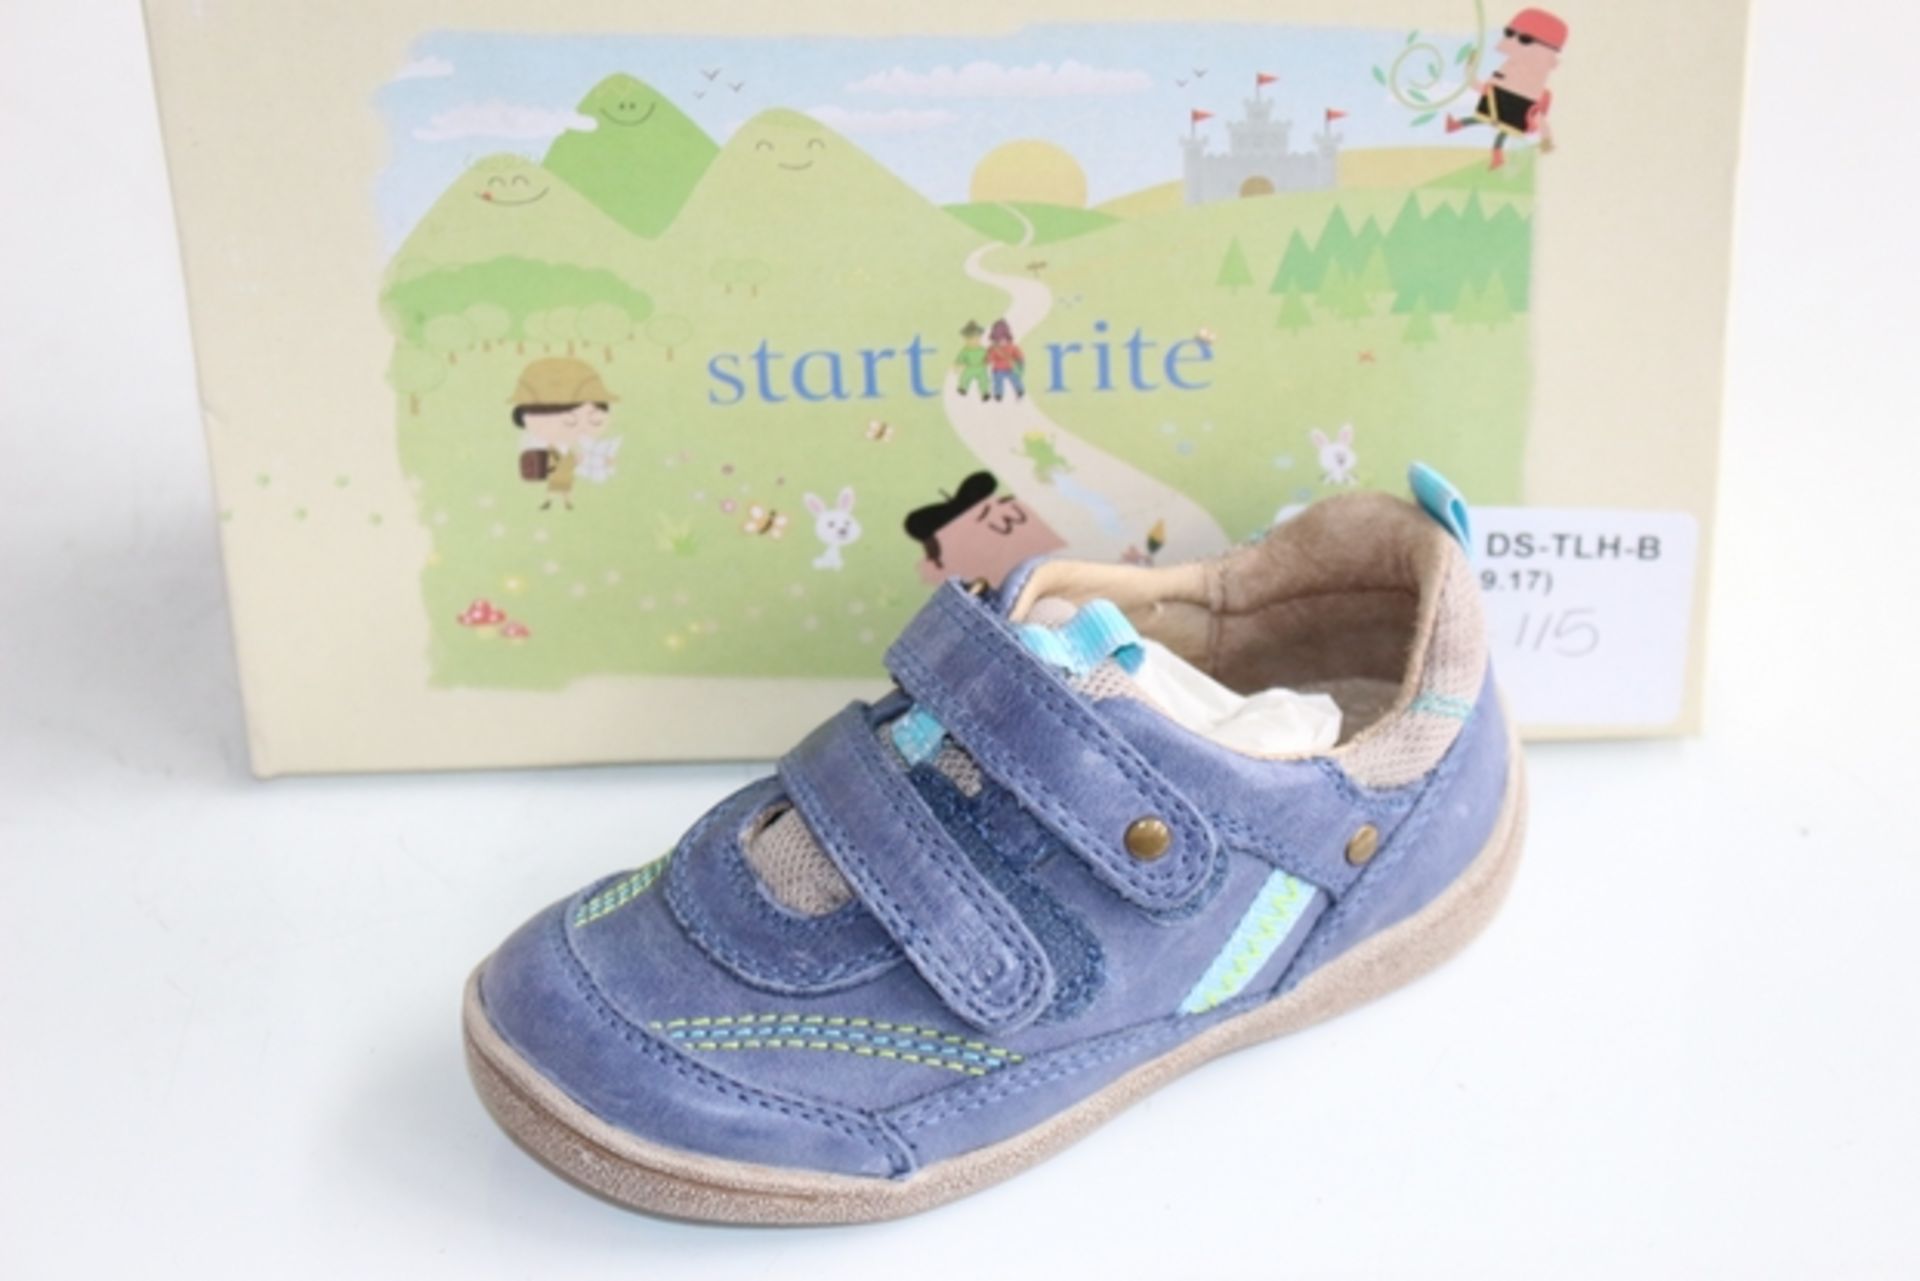 1X BOXED UNUSED PAIR OF START RIGHT CHILDREN'S SHOES SIZE 9F RRP £30 (DS-TLH-B) (36.115)